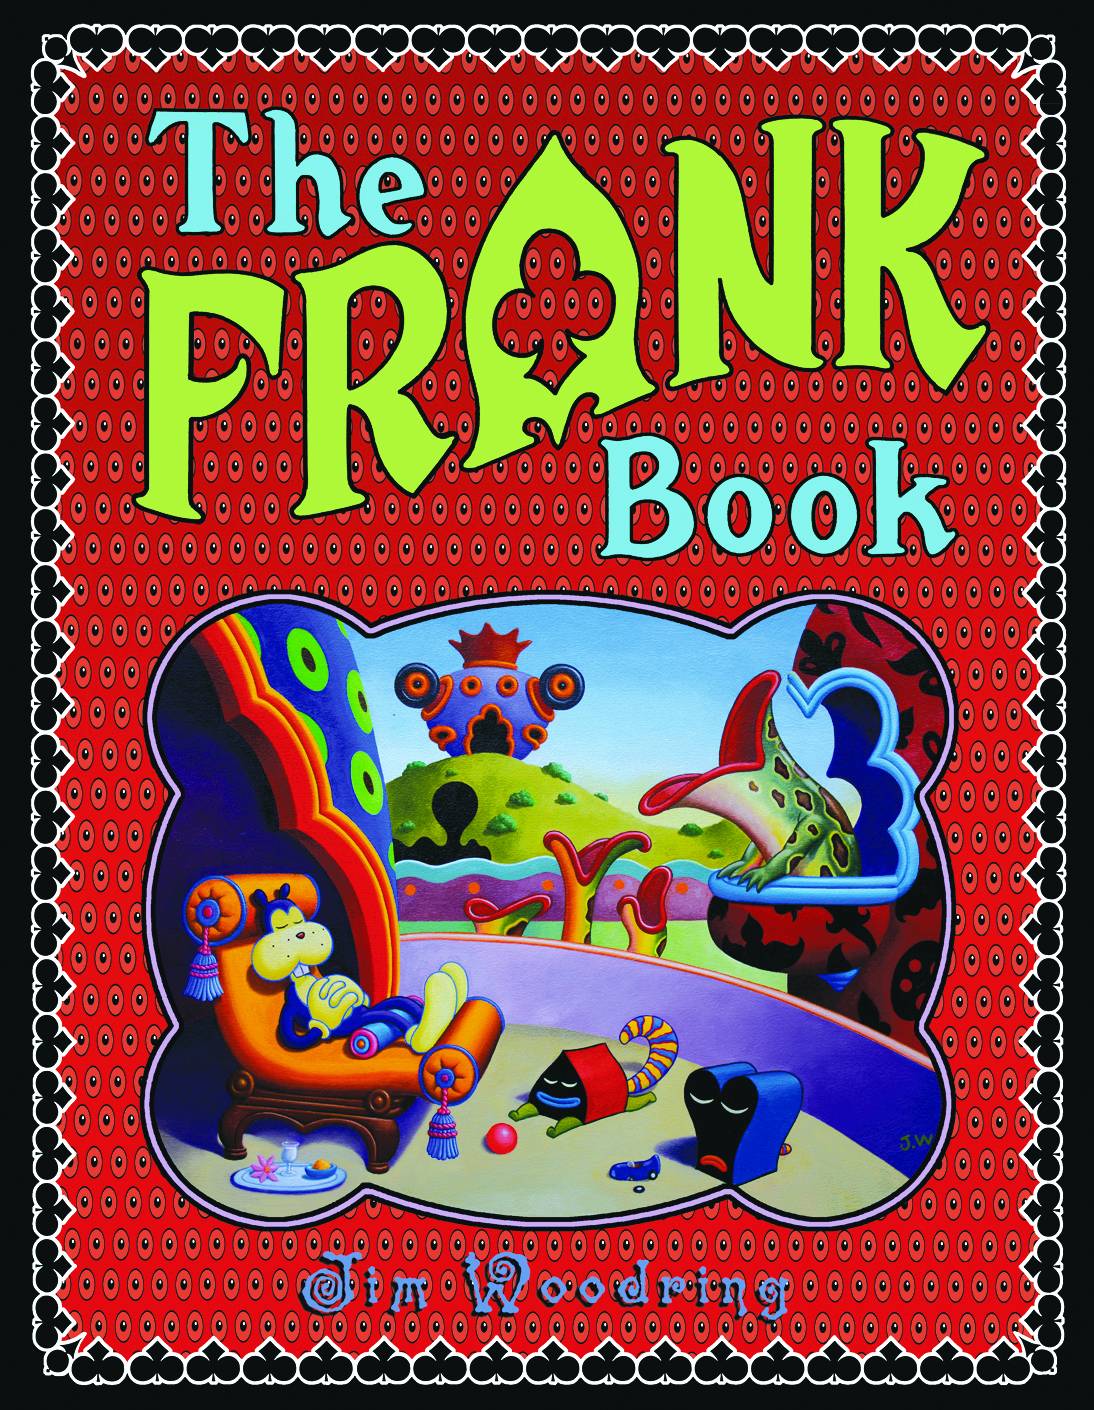 The Frank Book s/c